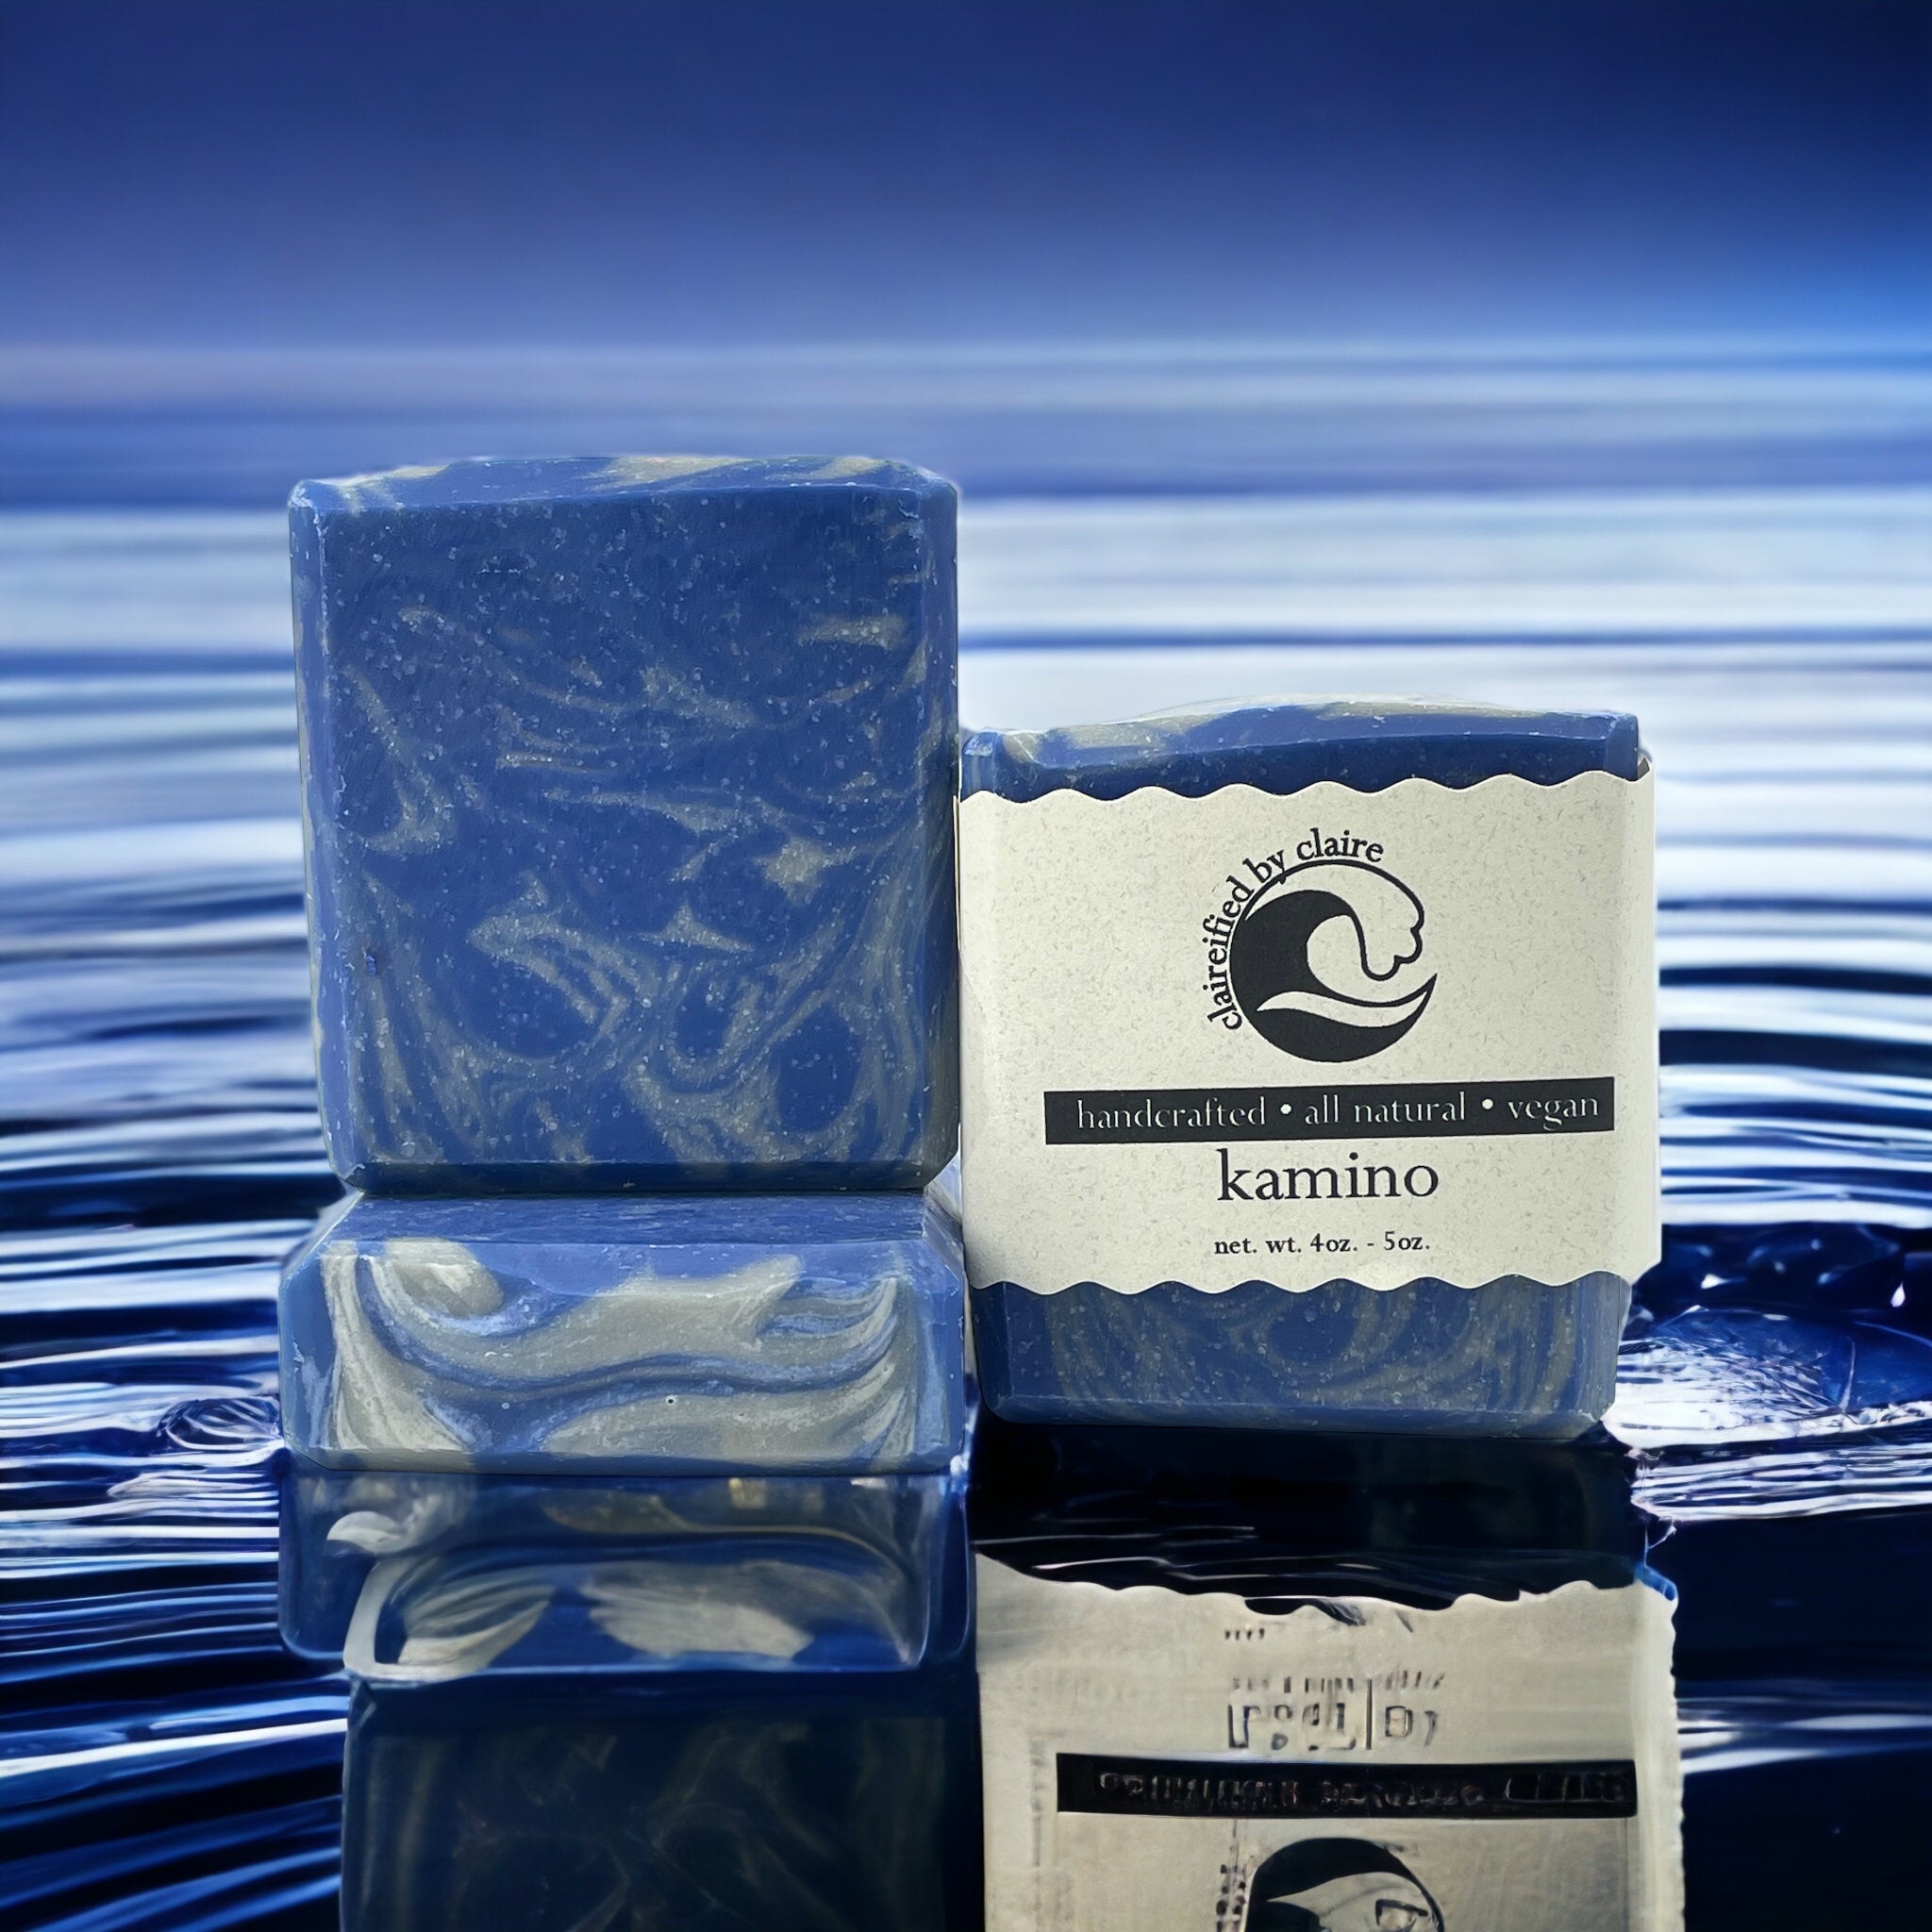 Kamino Handmade Soap inspired by the water planet, home of the Kaminoans